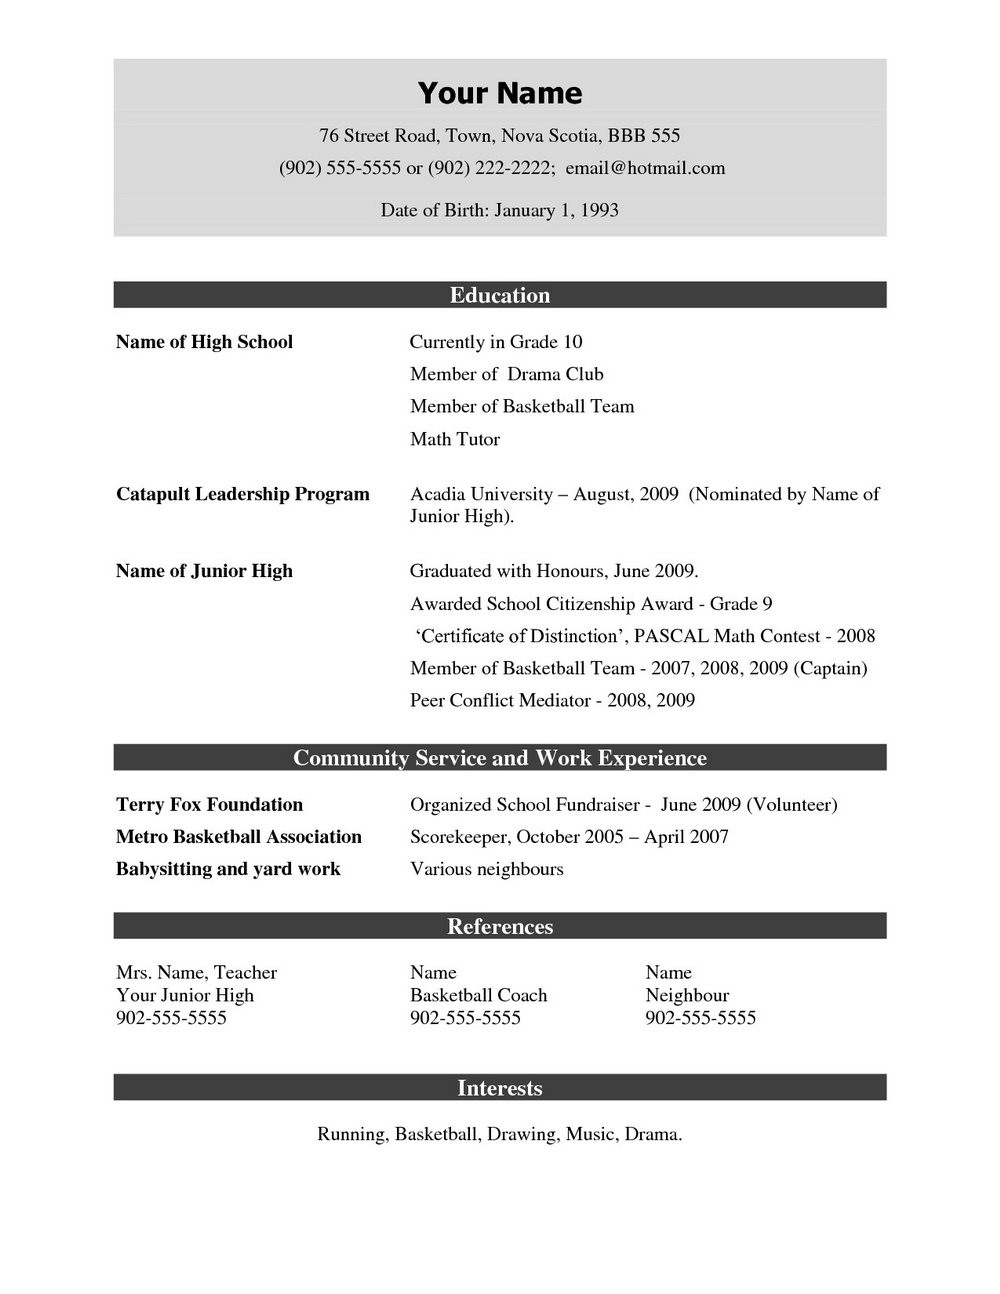 Sample Resume for Experienced Candidates Free Download Resume format for Experienced Free Download Pdf